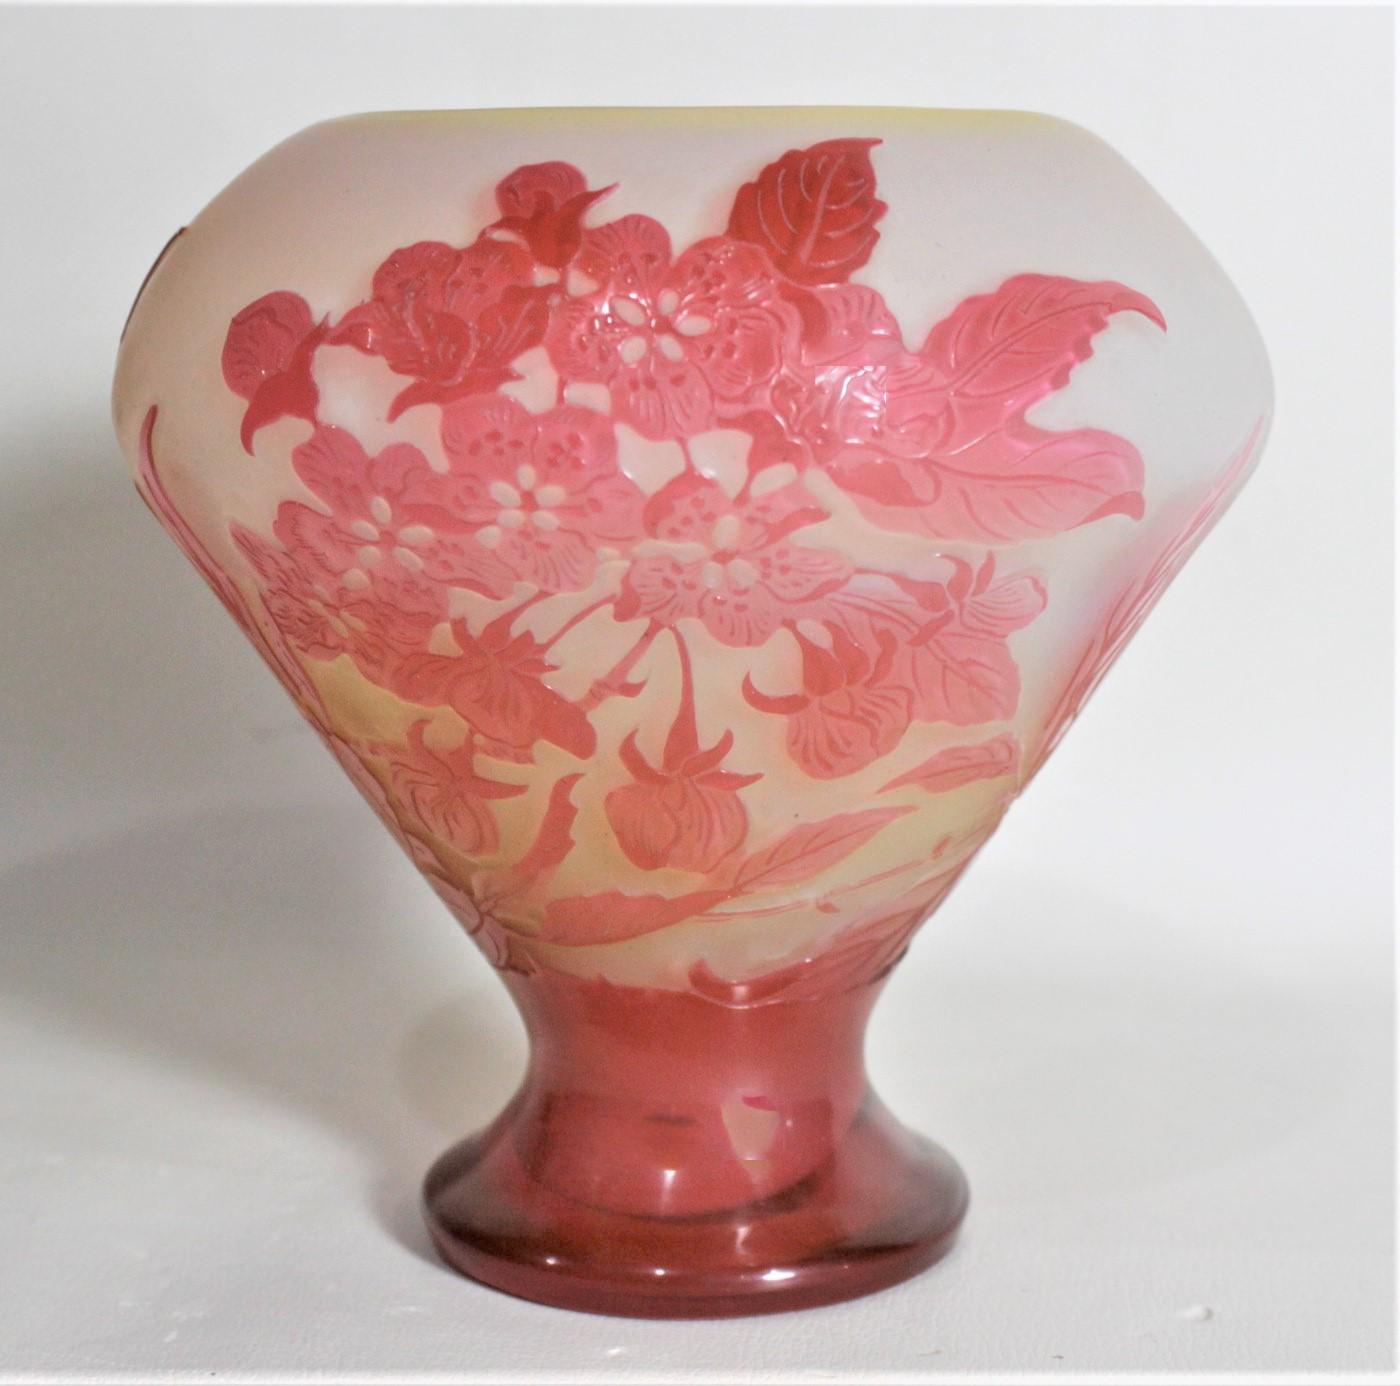 This cameo art glass cabinet vase was made by the highly renowned Emile Galle of France in circa 1905 in the period Art Nouveau style. The vase is done in in a bright yellow ground with a frosted white layer over top, followed bya bright red or